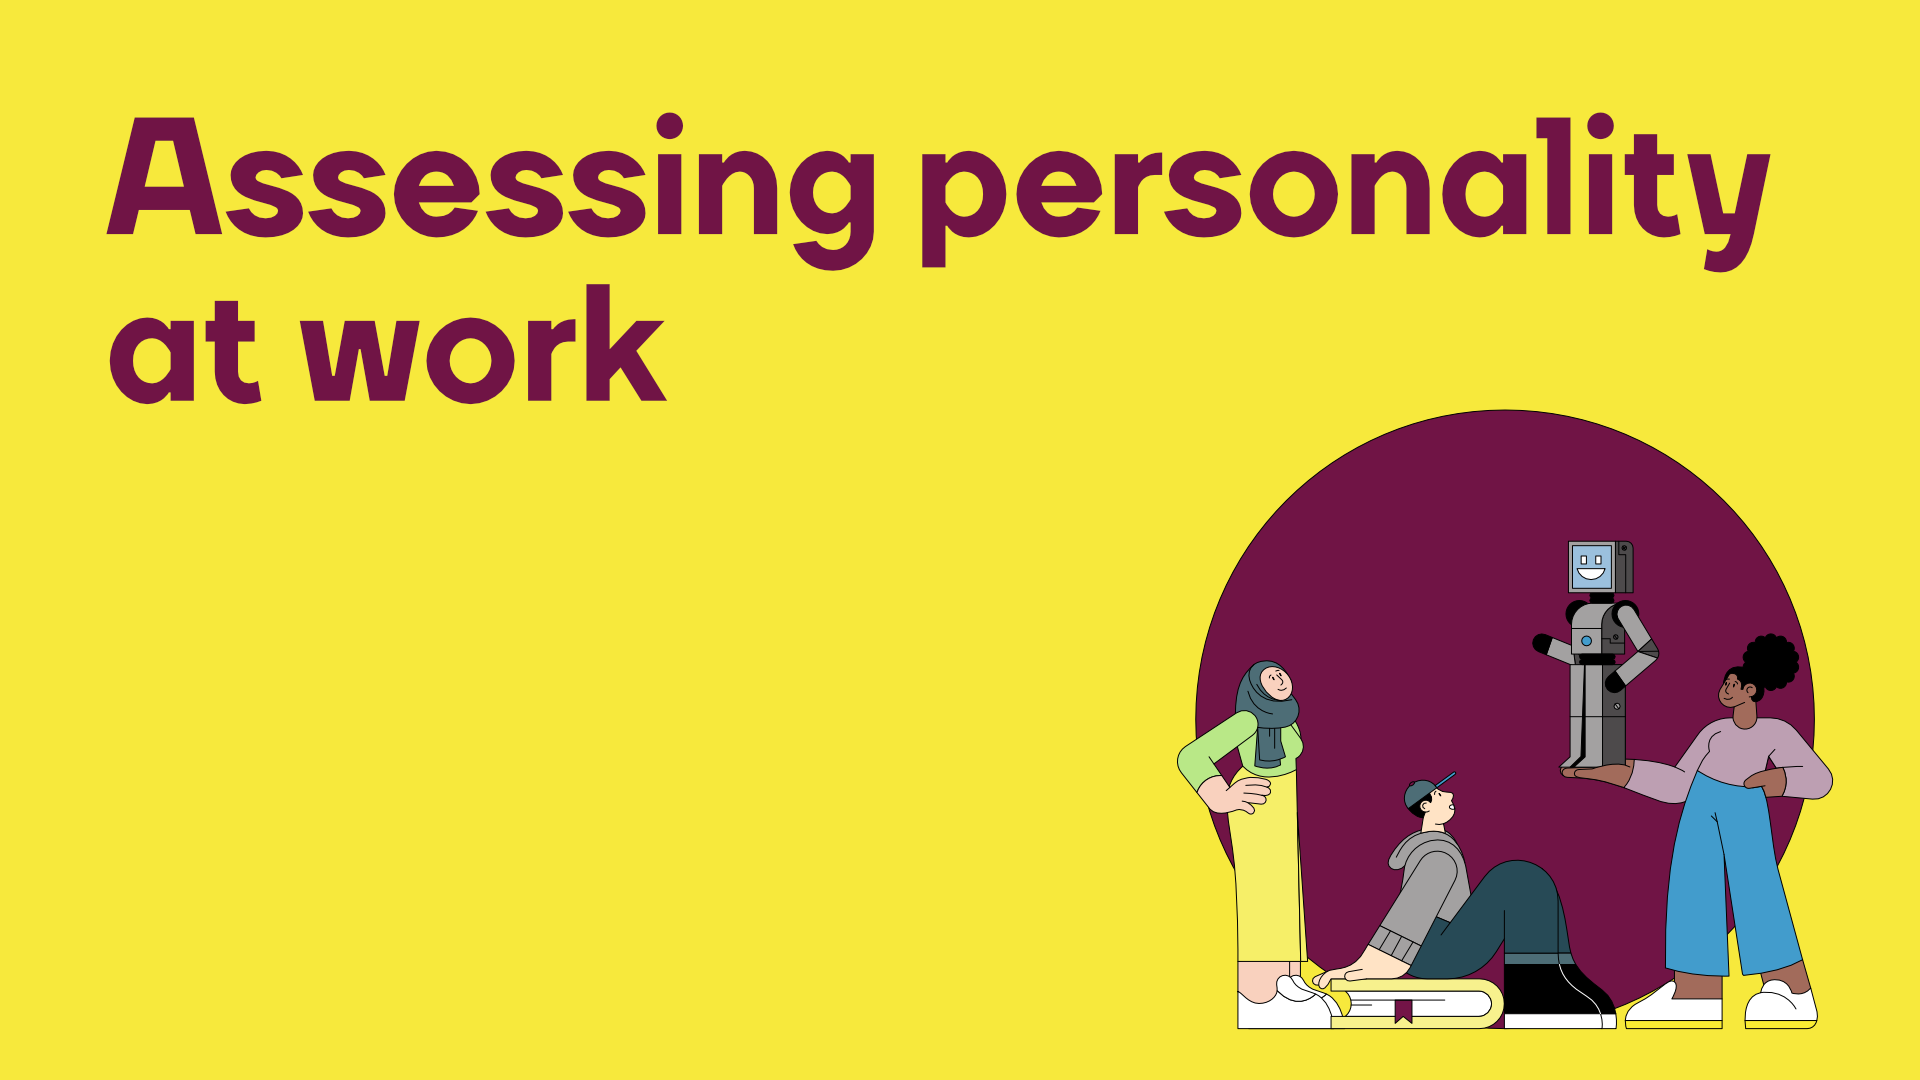 Assessing personality at work